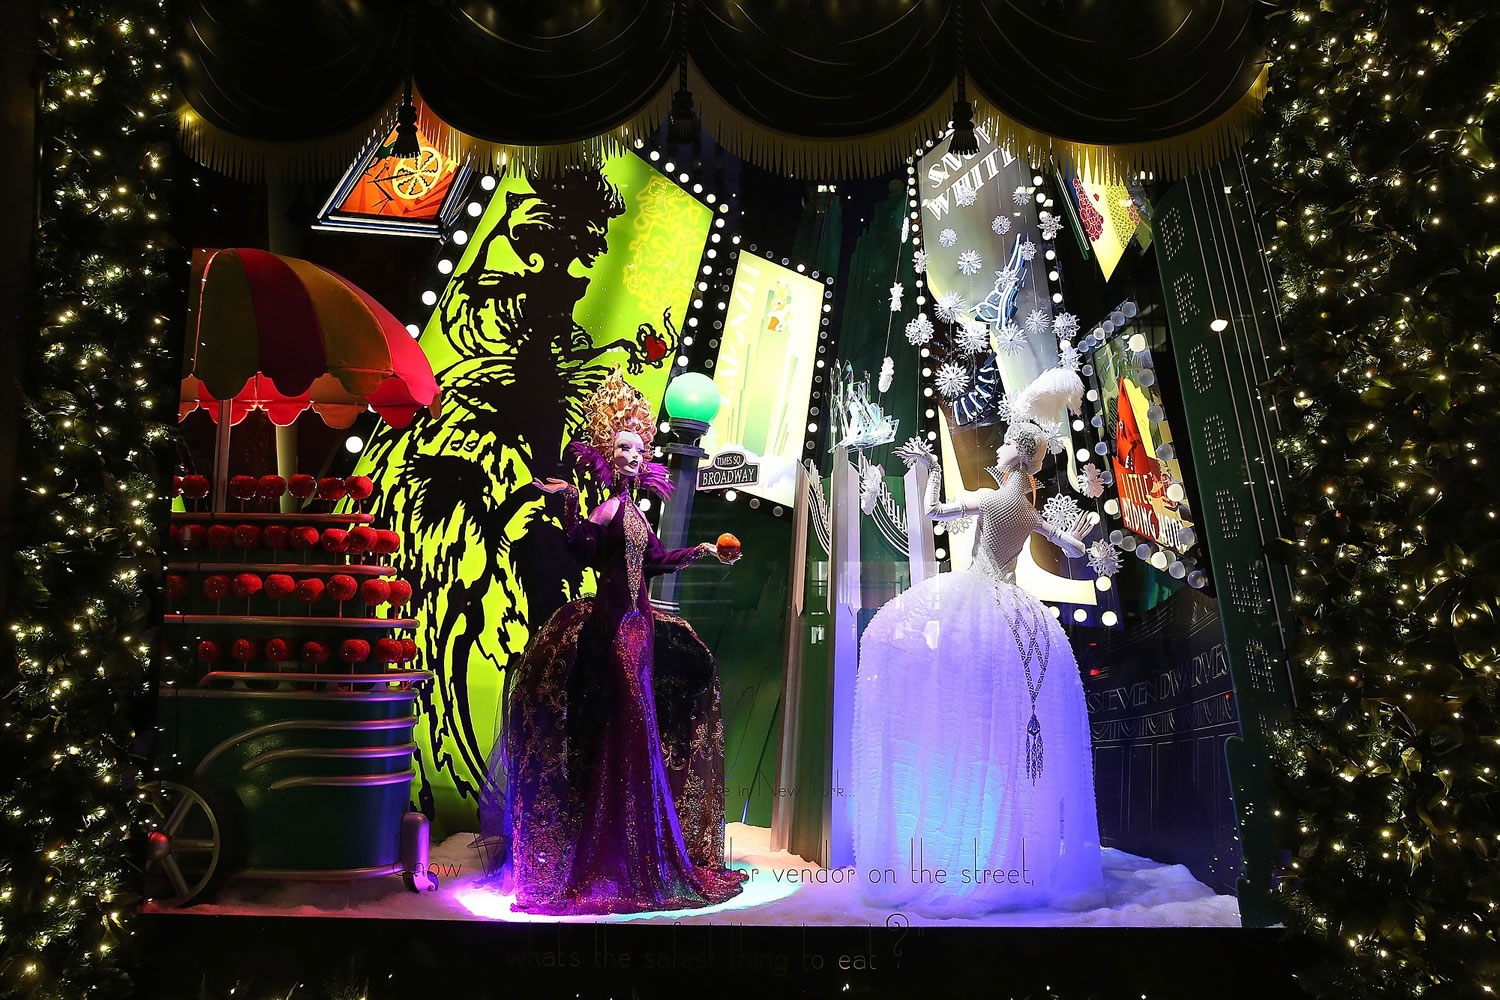 Saks Fifth Avenue
A holiday windows at Saks Fifth Avenue's flagship store in New York City. Saks' window displays this season are themed on classic fairytales but are decorated in Art Deco style.